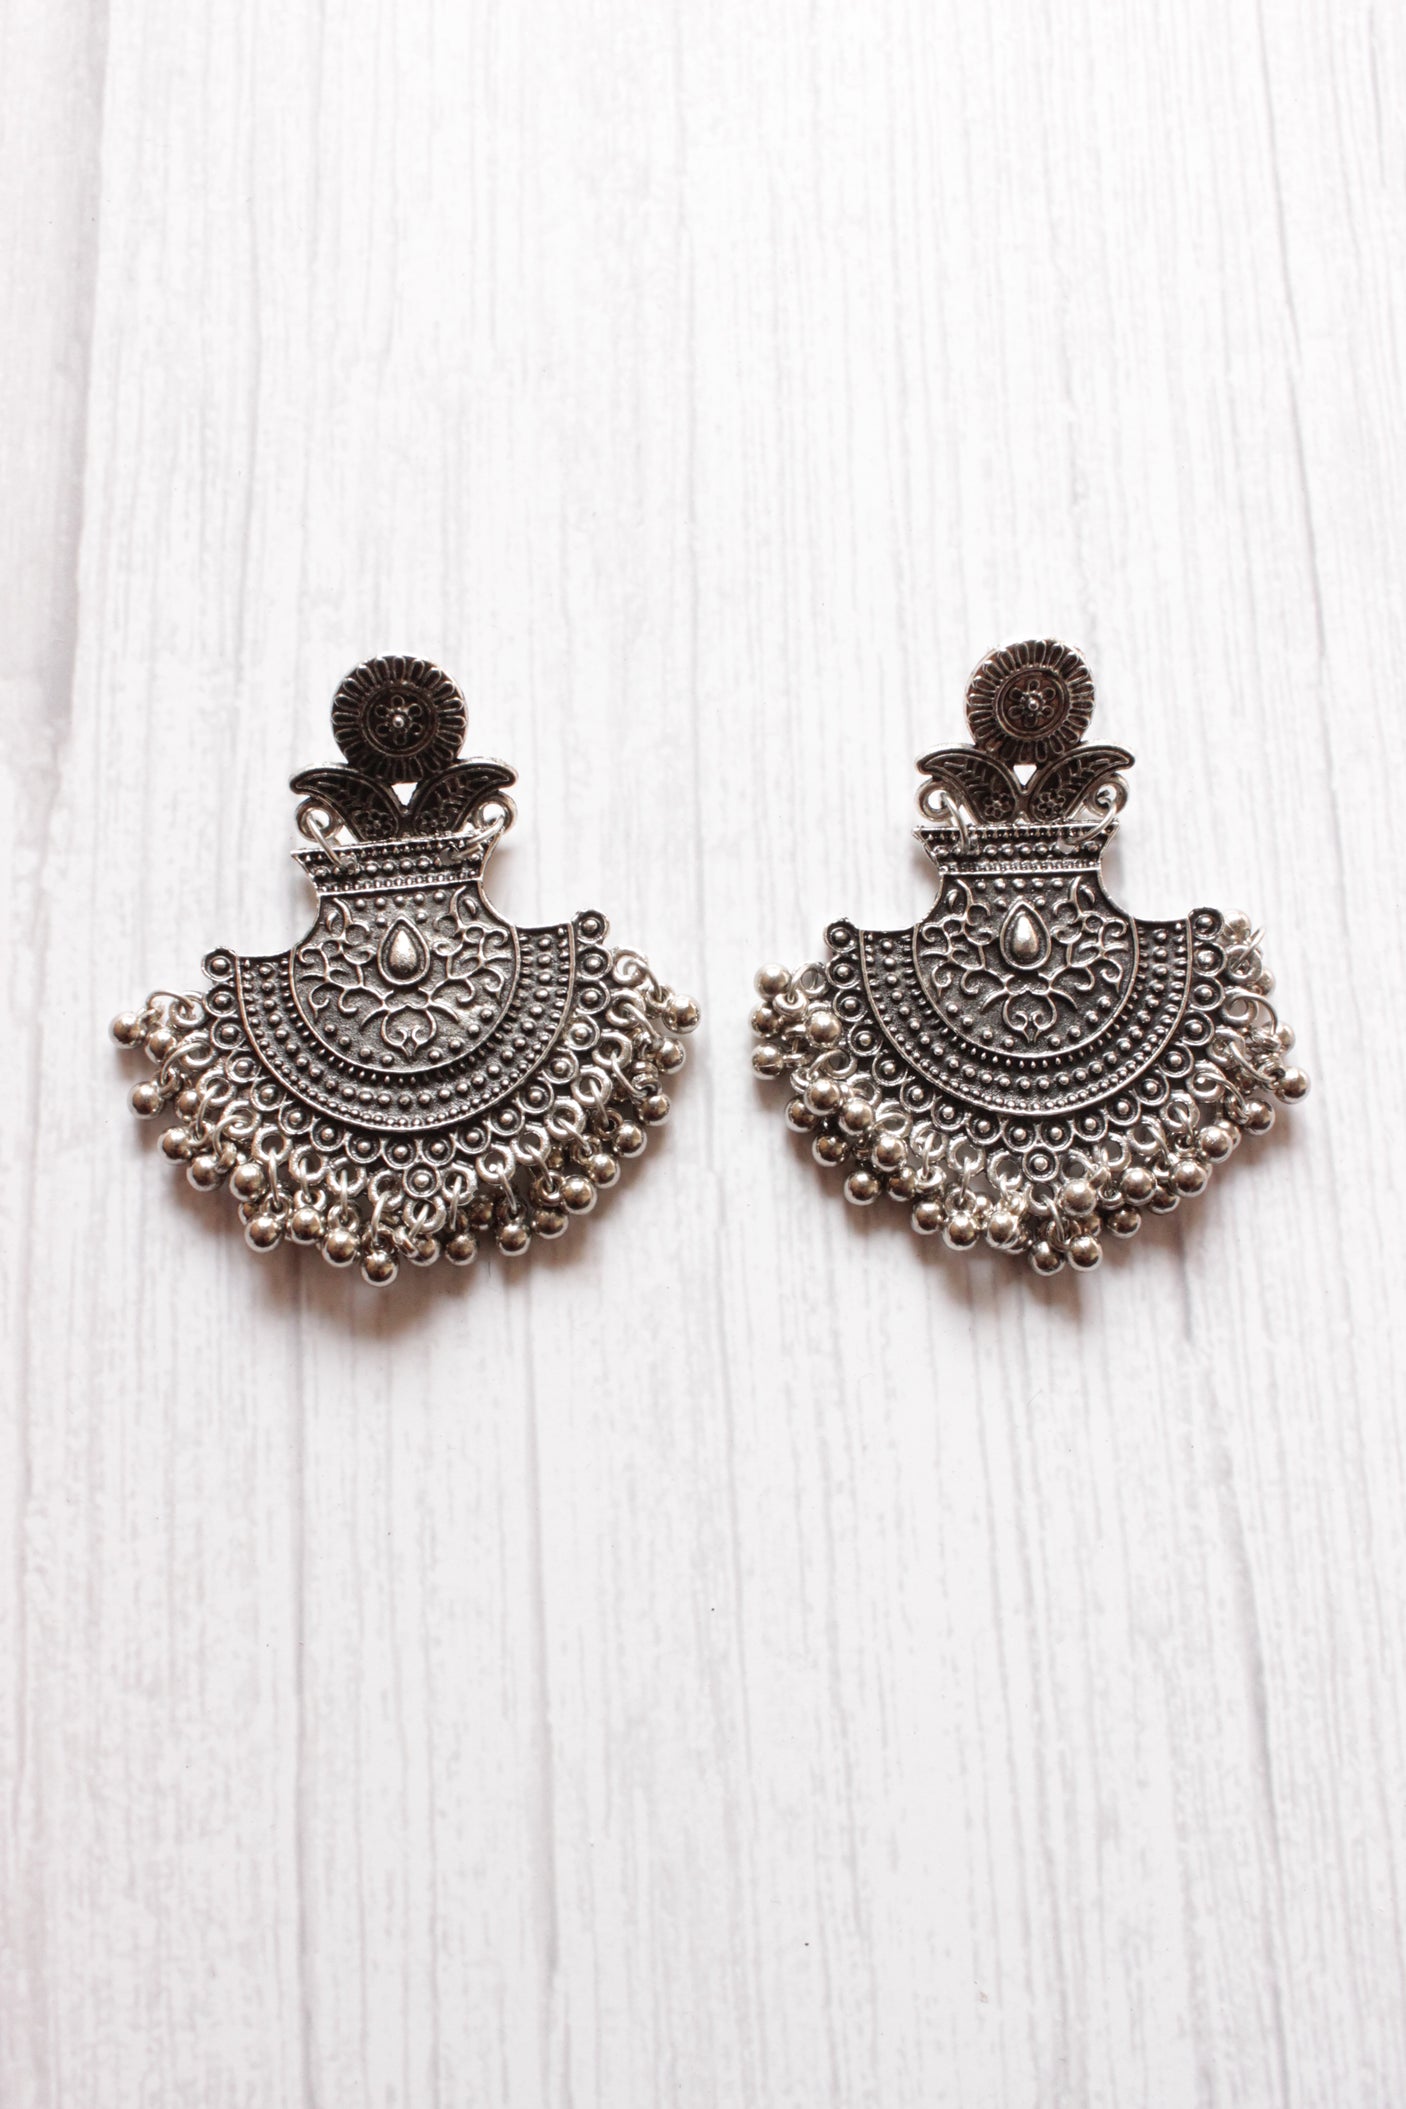 Oxidised Silver Statement Earrings with Metal Beads Detailing